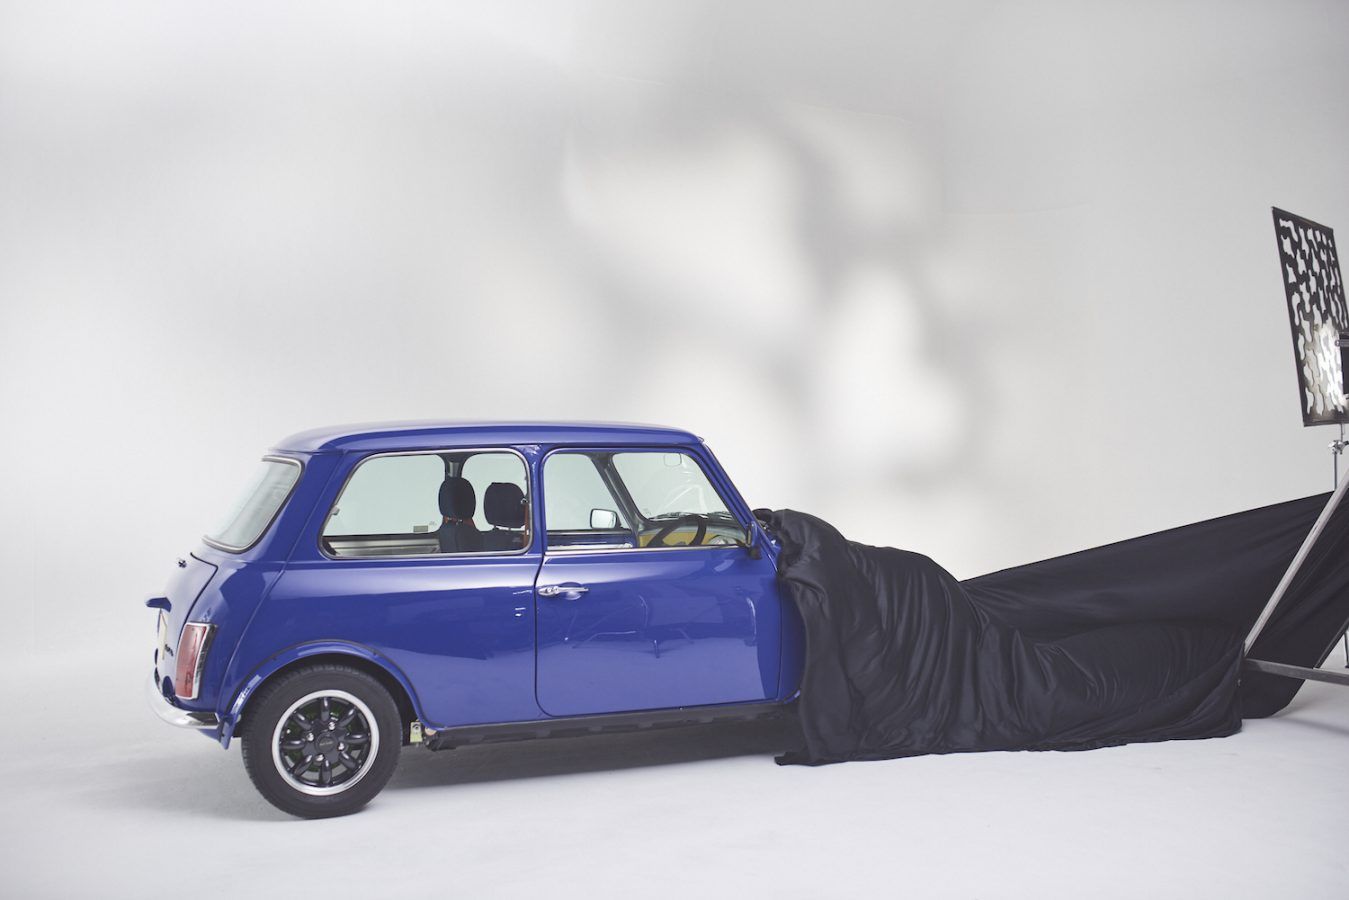 Paul Smith Teams Up with MINI to Release a Sustainable, Electric